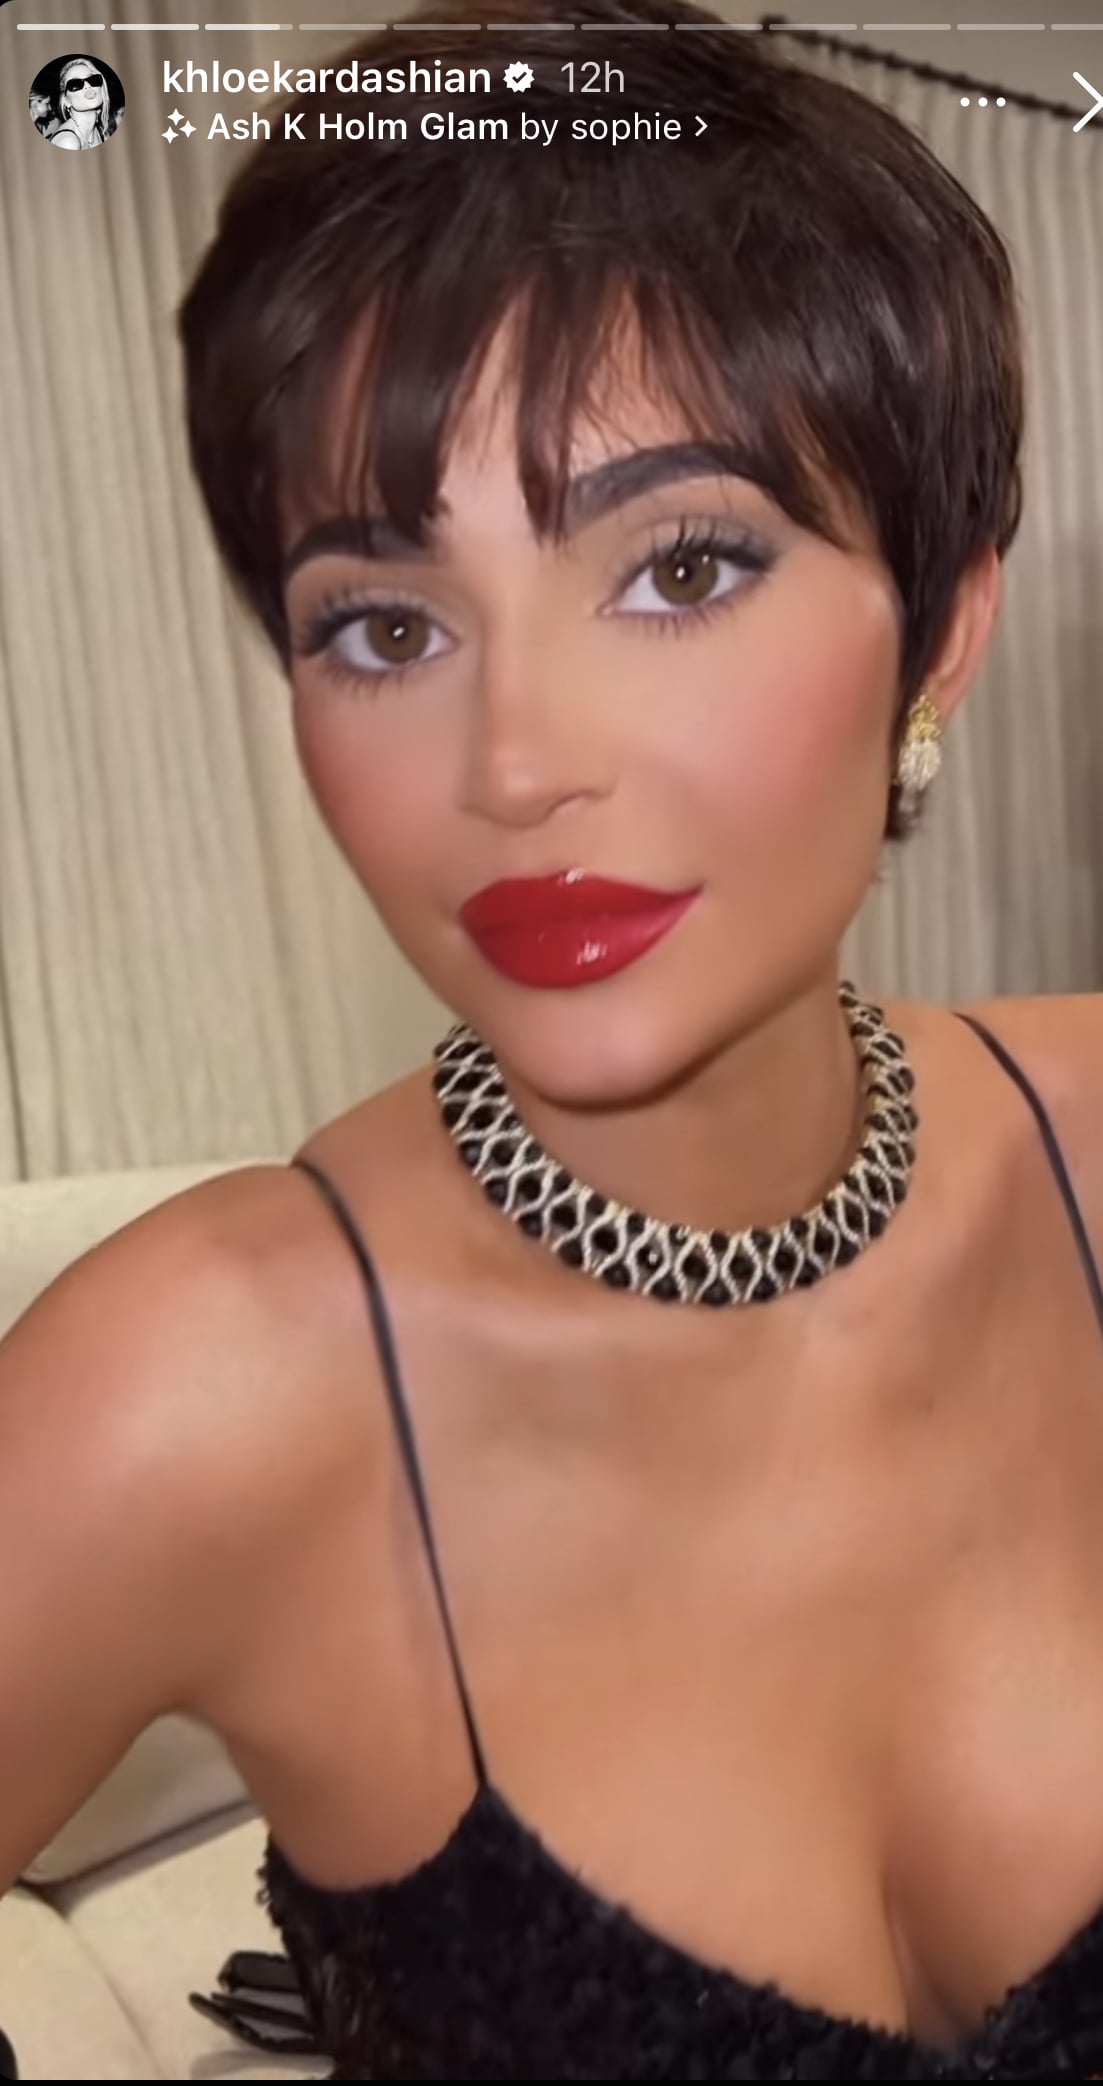 Kim Kardashian Transformed Her Look With New Hairstyle